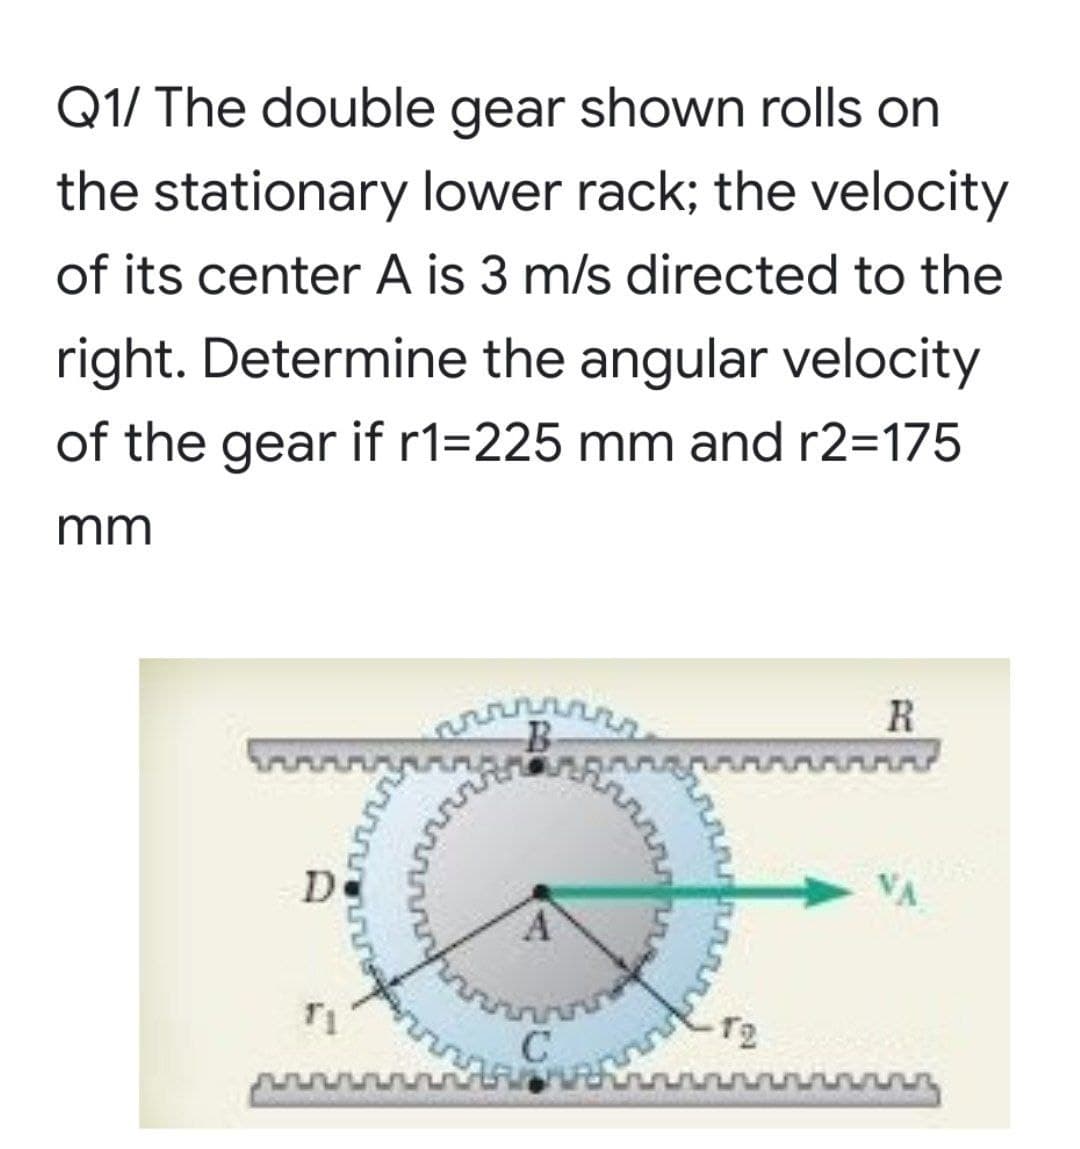 Q1/ The double gear shown rolls on
the stationary lower rack; the velocity
of its center A is 3 m/s directed to the
right. Determine the angular velocity
of the gear if r1=225 mm and r2=175
mm
R
De
